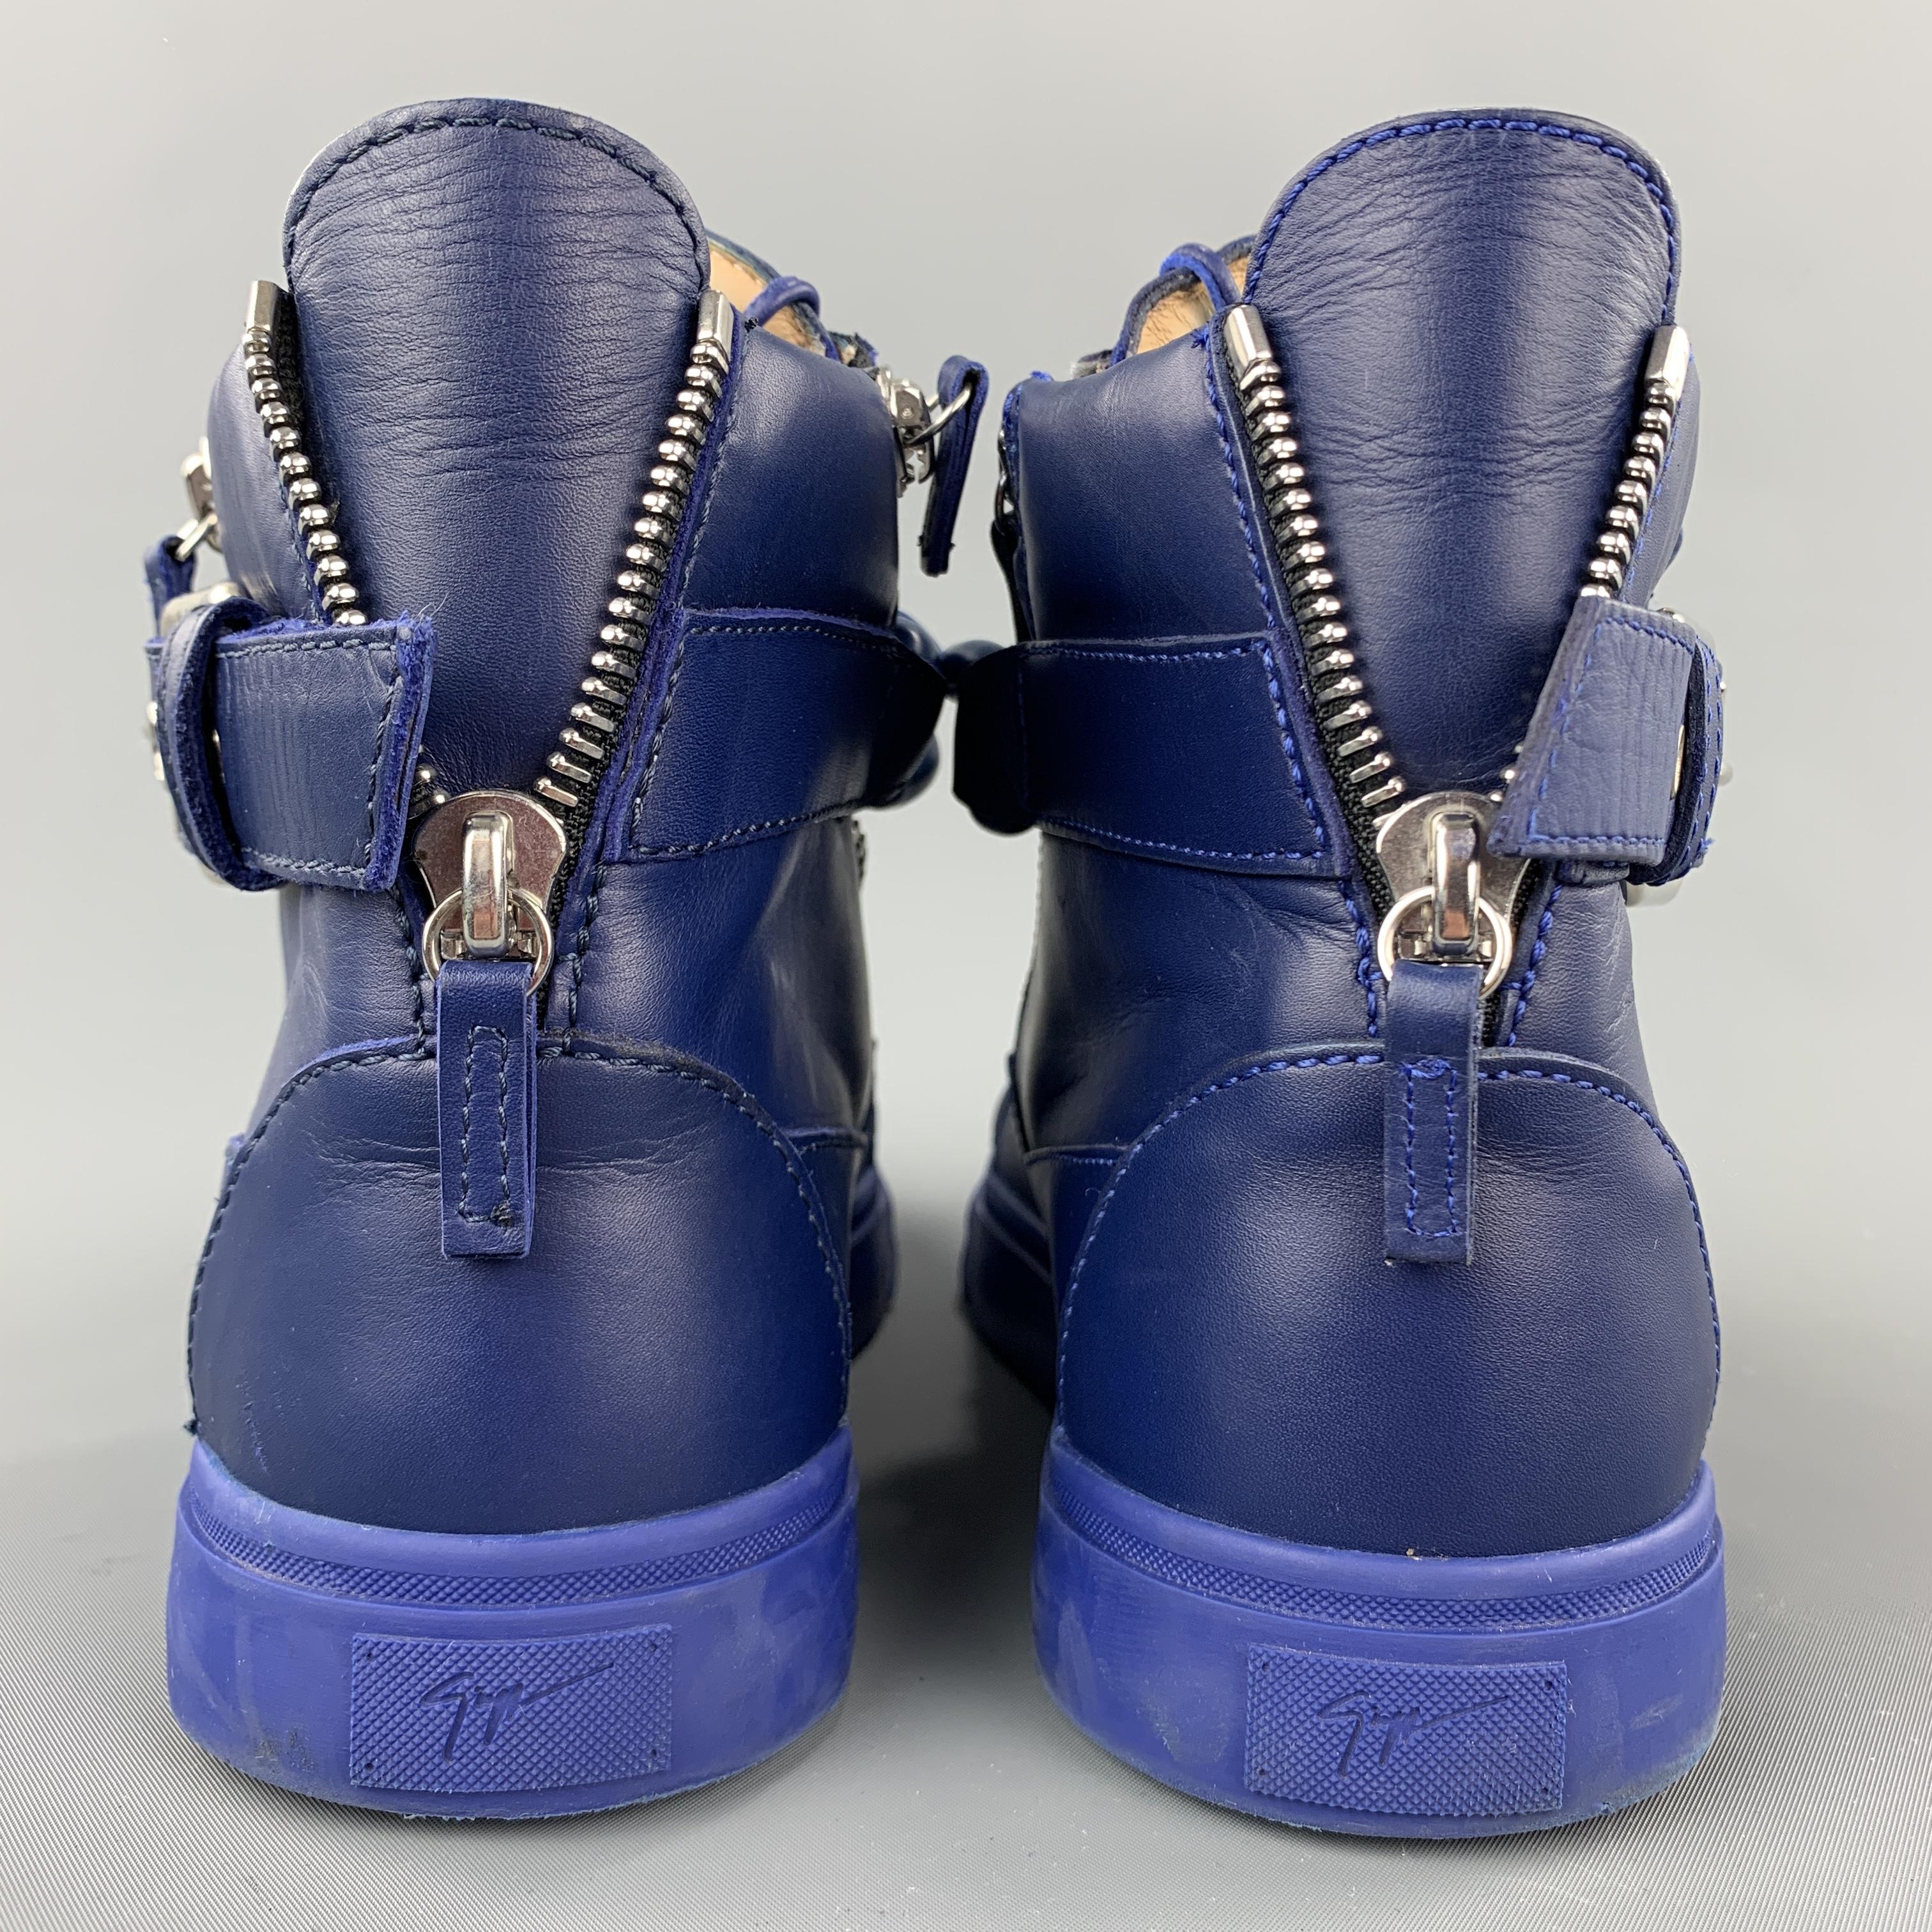 Men's GIUSEPPE ZANOTTI Size 10 Solid Blue Leather High Top Sneakers